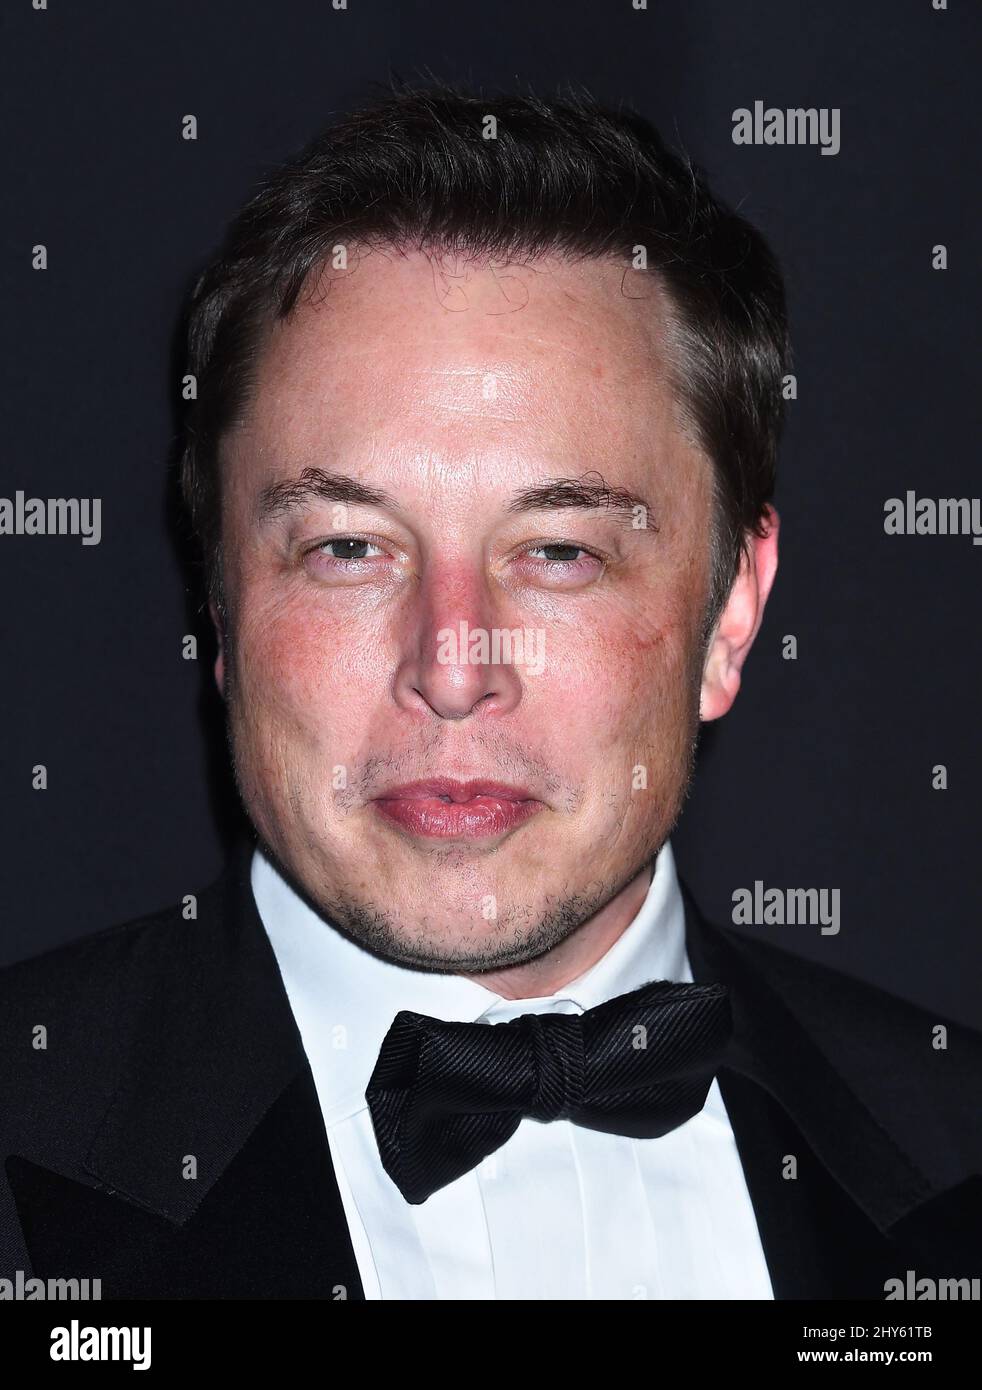 Elon Musk attending the first annual Diamond Ball held at The Vineyard in Los Angeles, California. Stock Photo